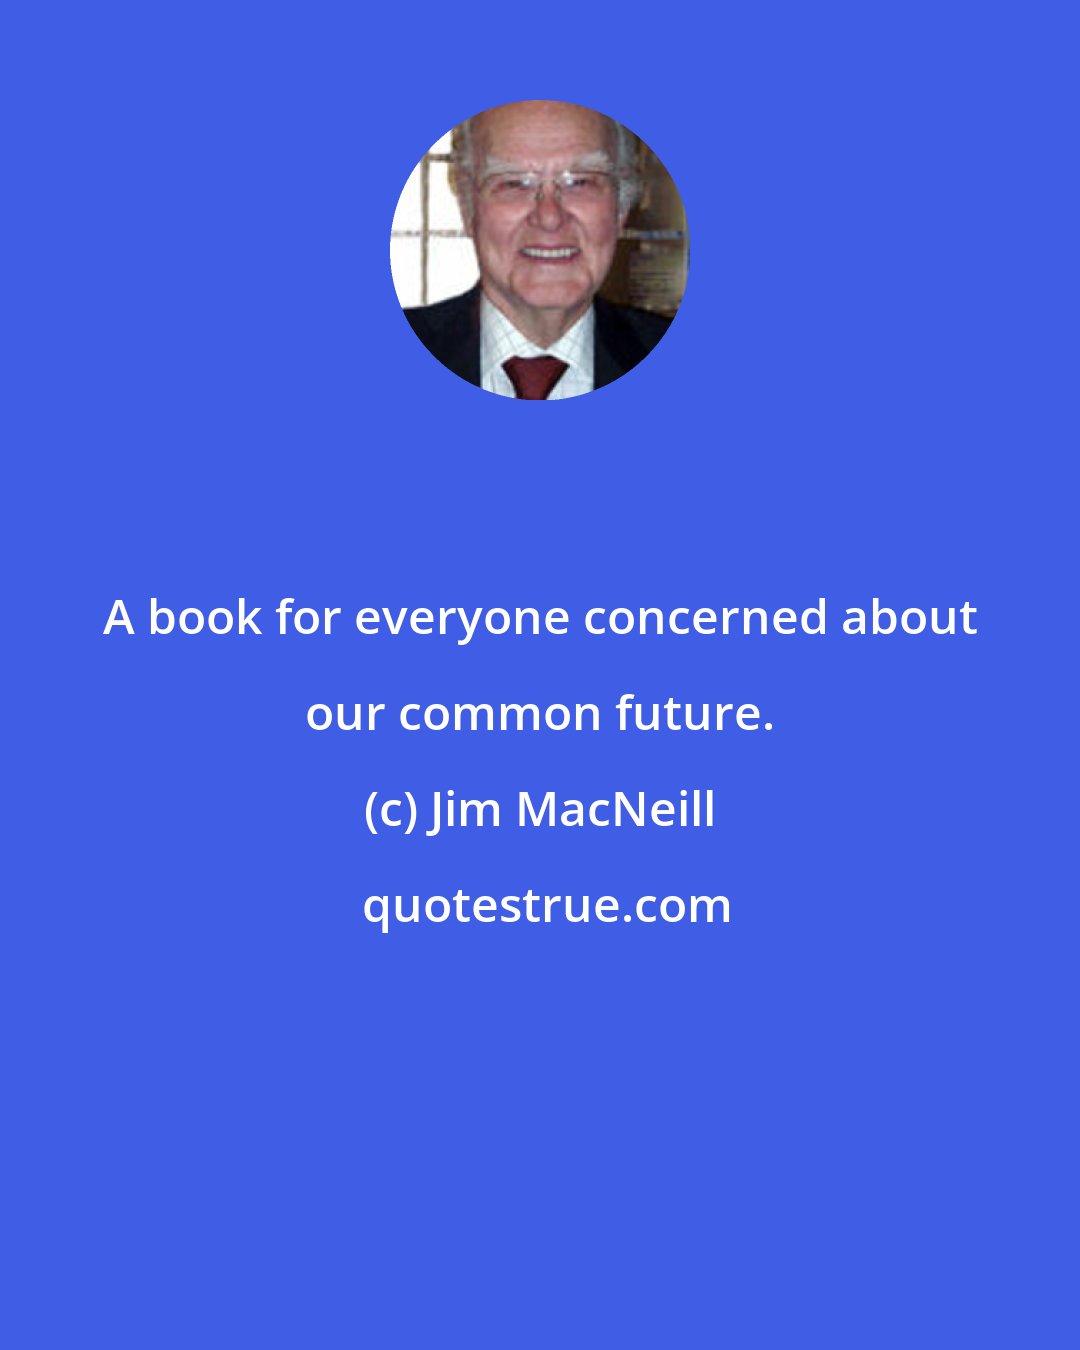 Jim MacNeill: A book for everyone concerned about our common future.